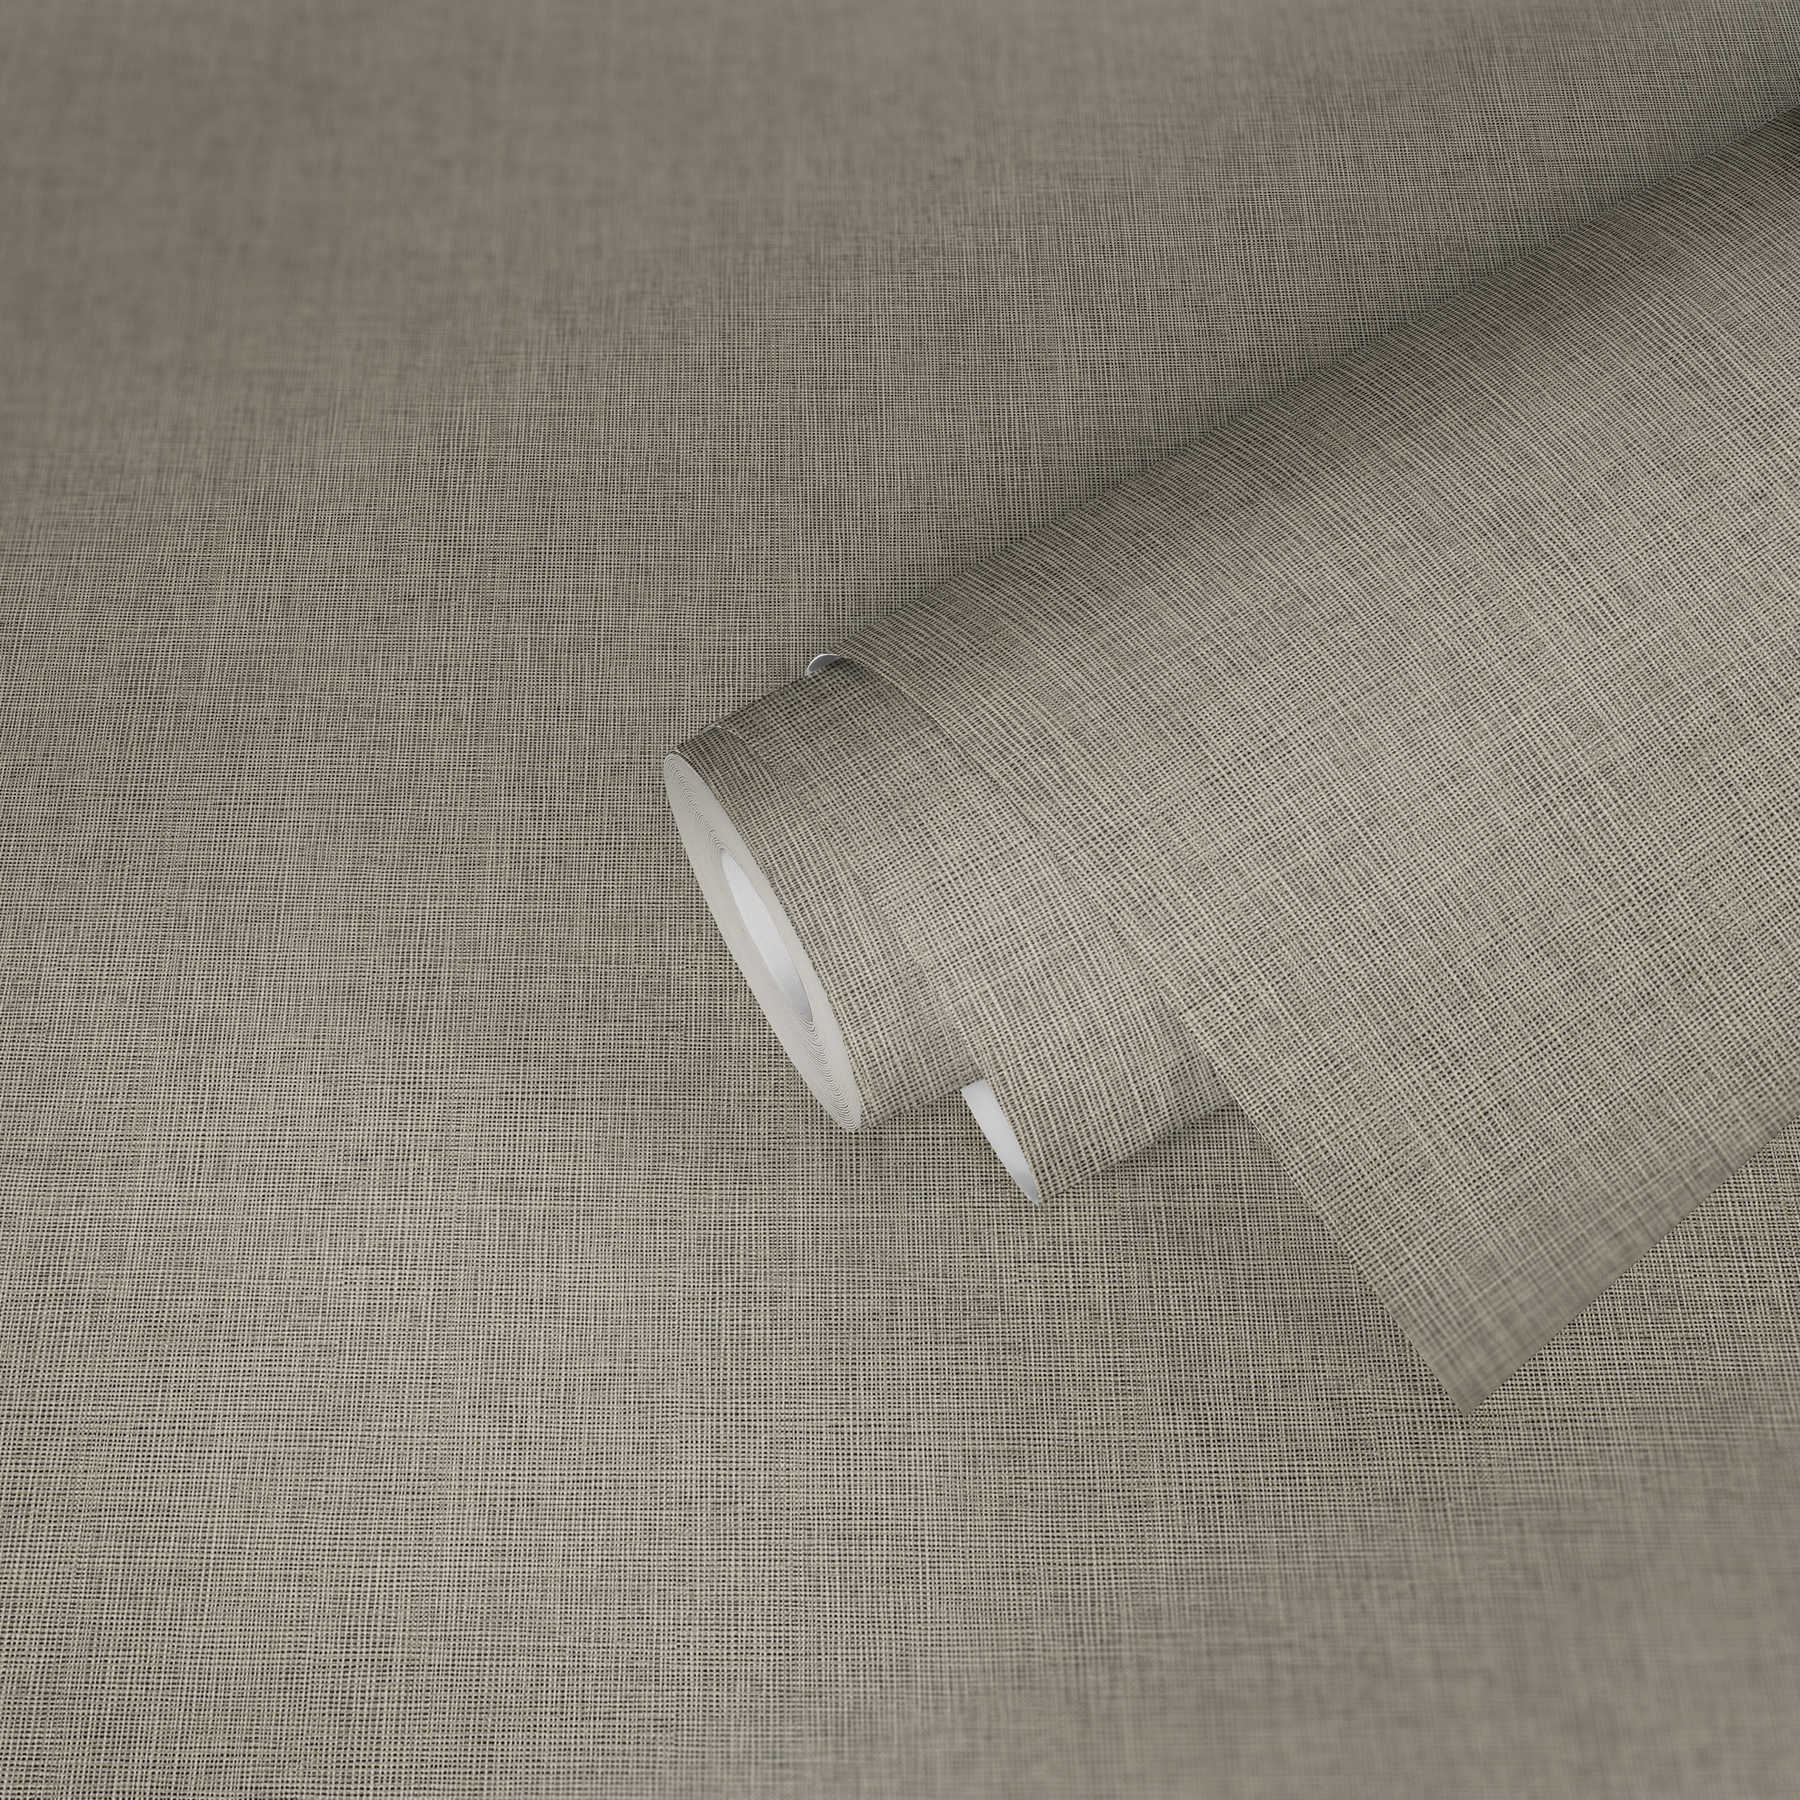             Plain wallpaper in textile look with silver metallic details - blue, grey, silver
        